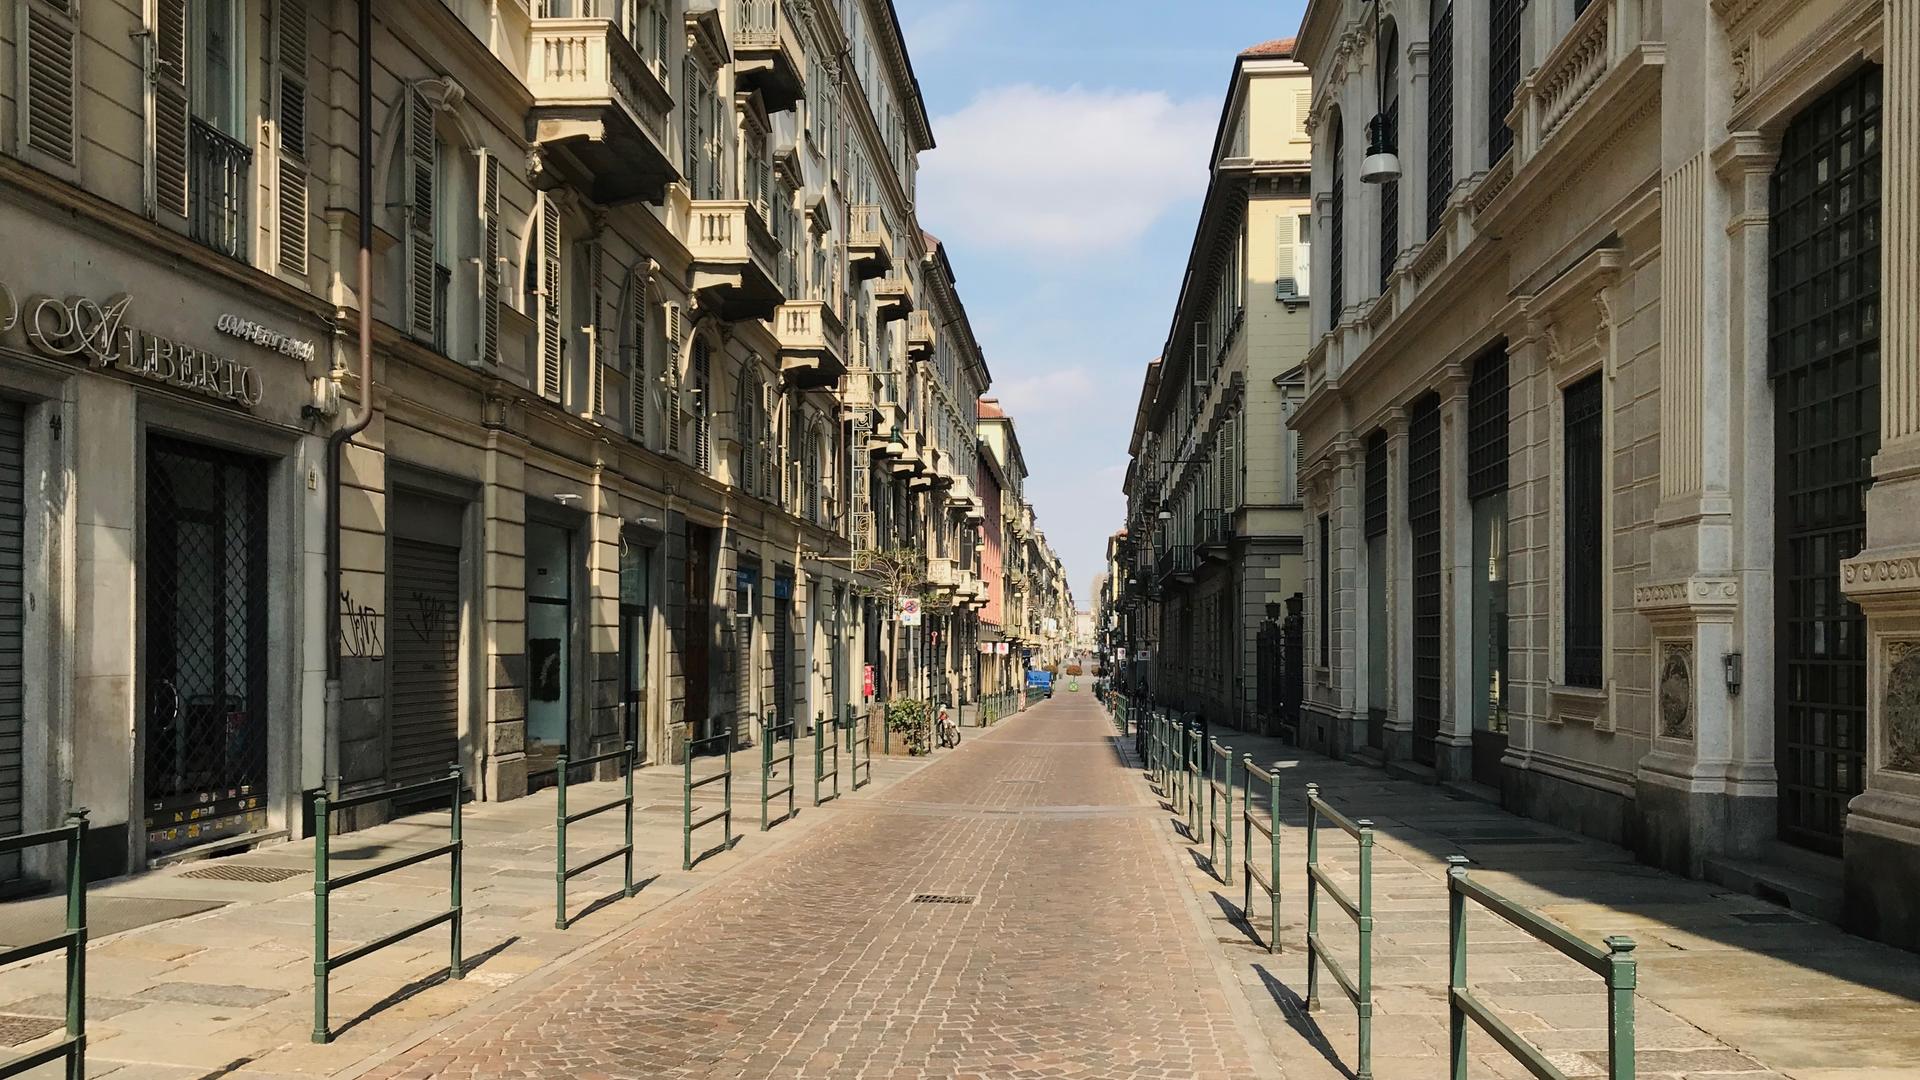 The train station in the Italian city of Turin was empty when reporter Francesca Berardi took a walk through the area last week. 